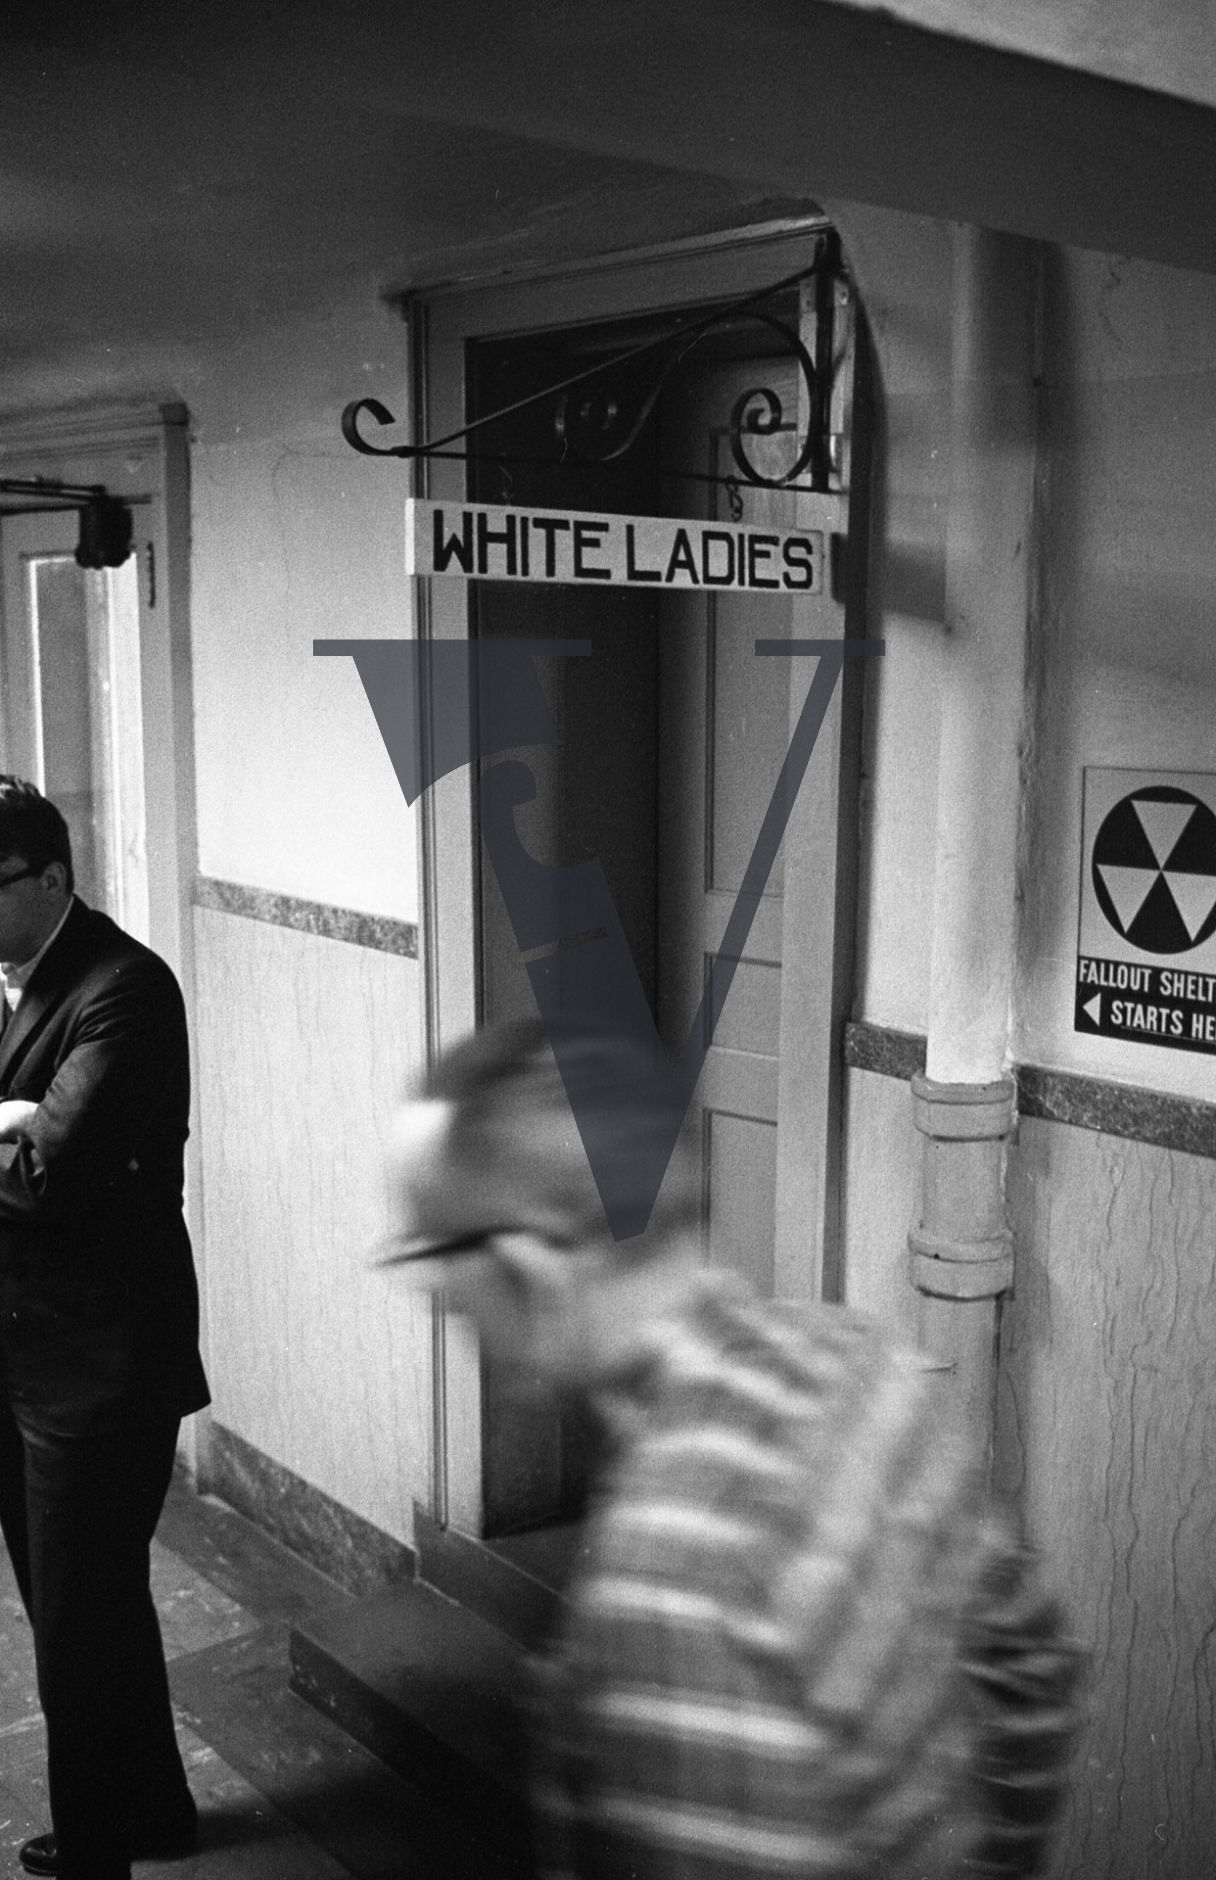 Racist signs and posters, close-up, segregated toilet sign 'White Ladies'.